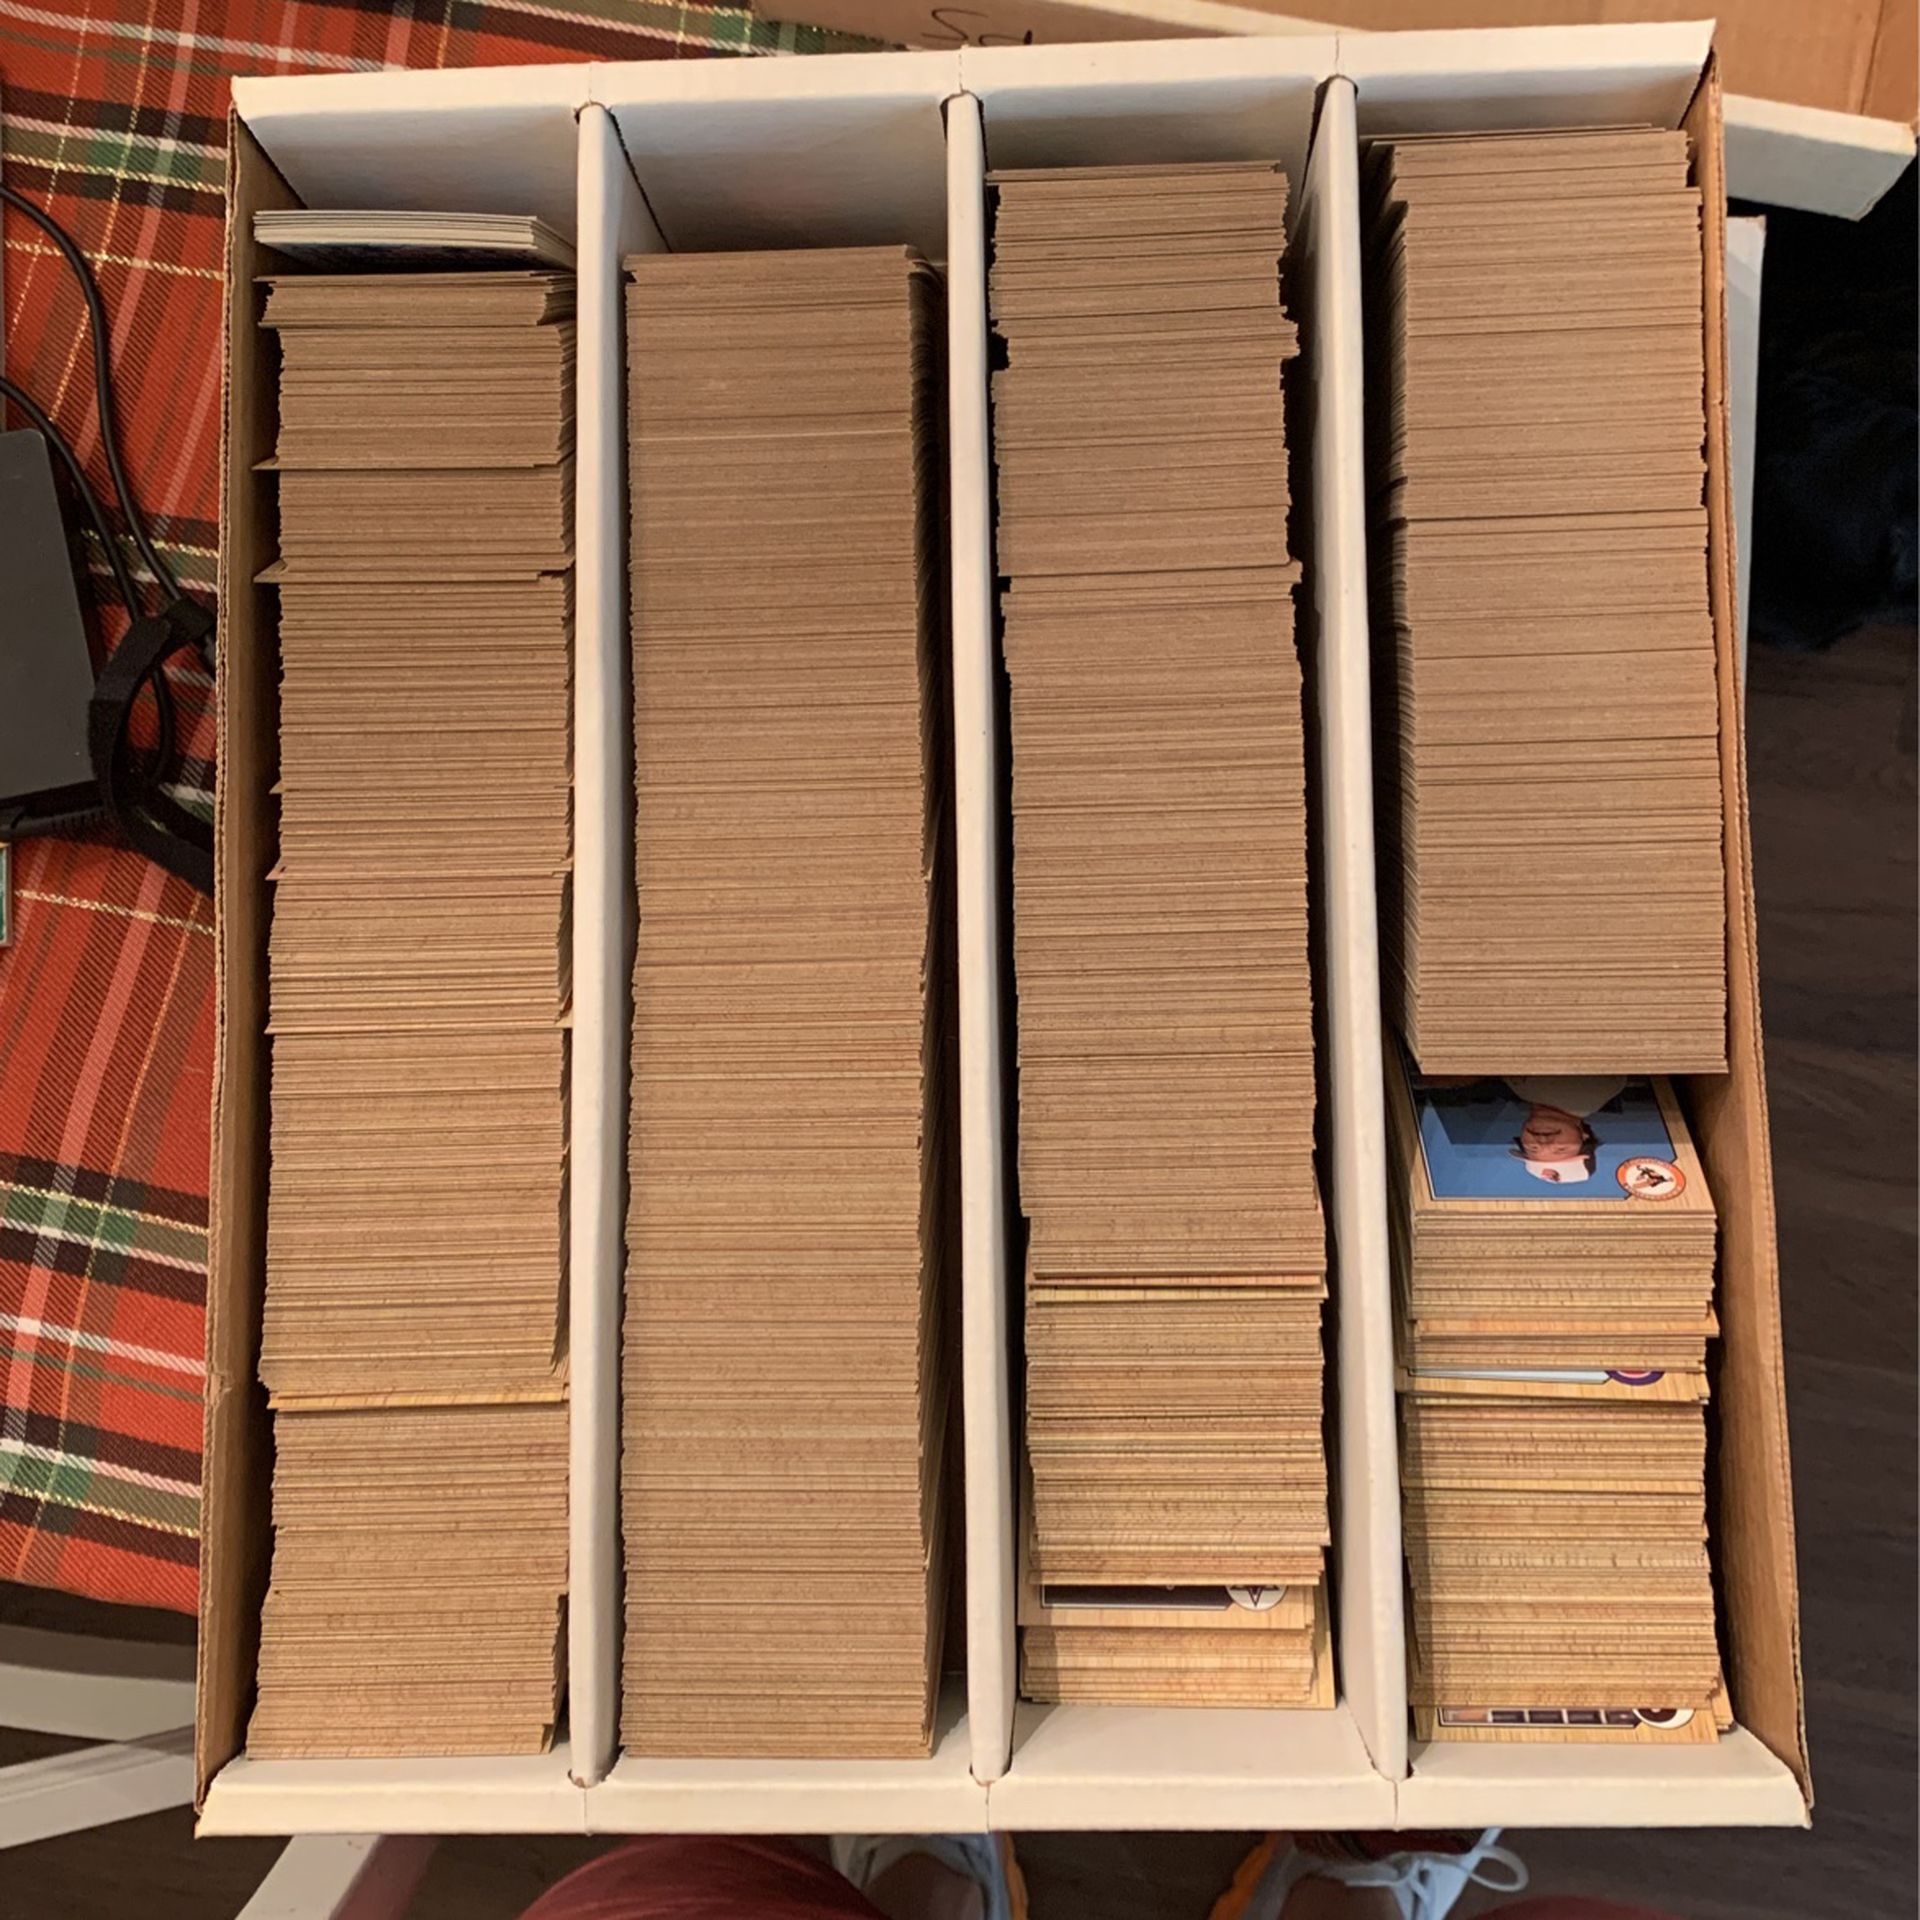 1987 Topps Baseball Set- About 1000 Cards